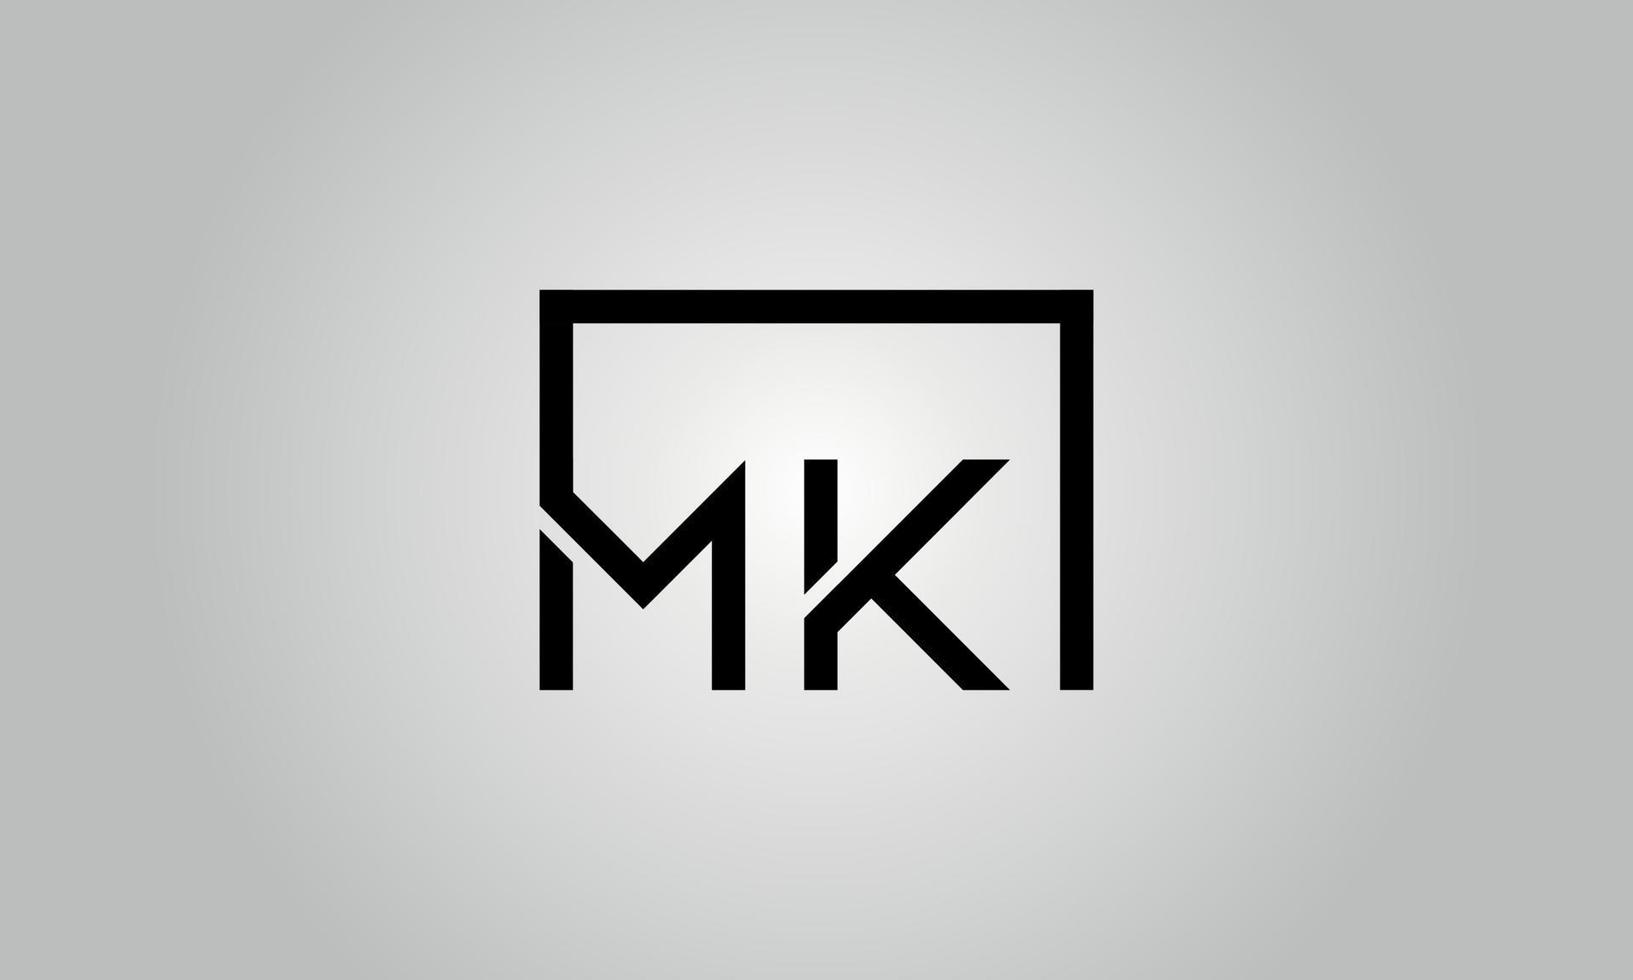 Letter MK logo design. MK logo with square shape in black colors vector free vector template.